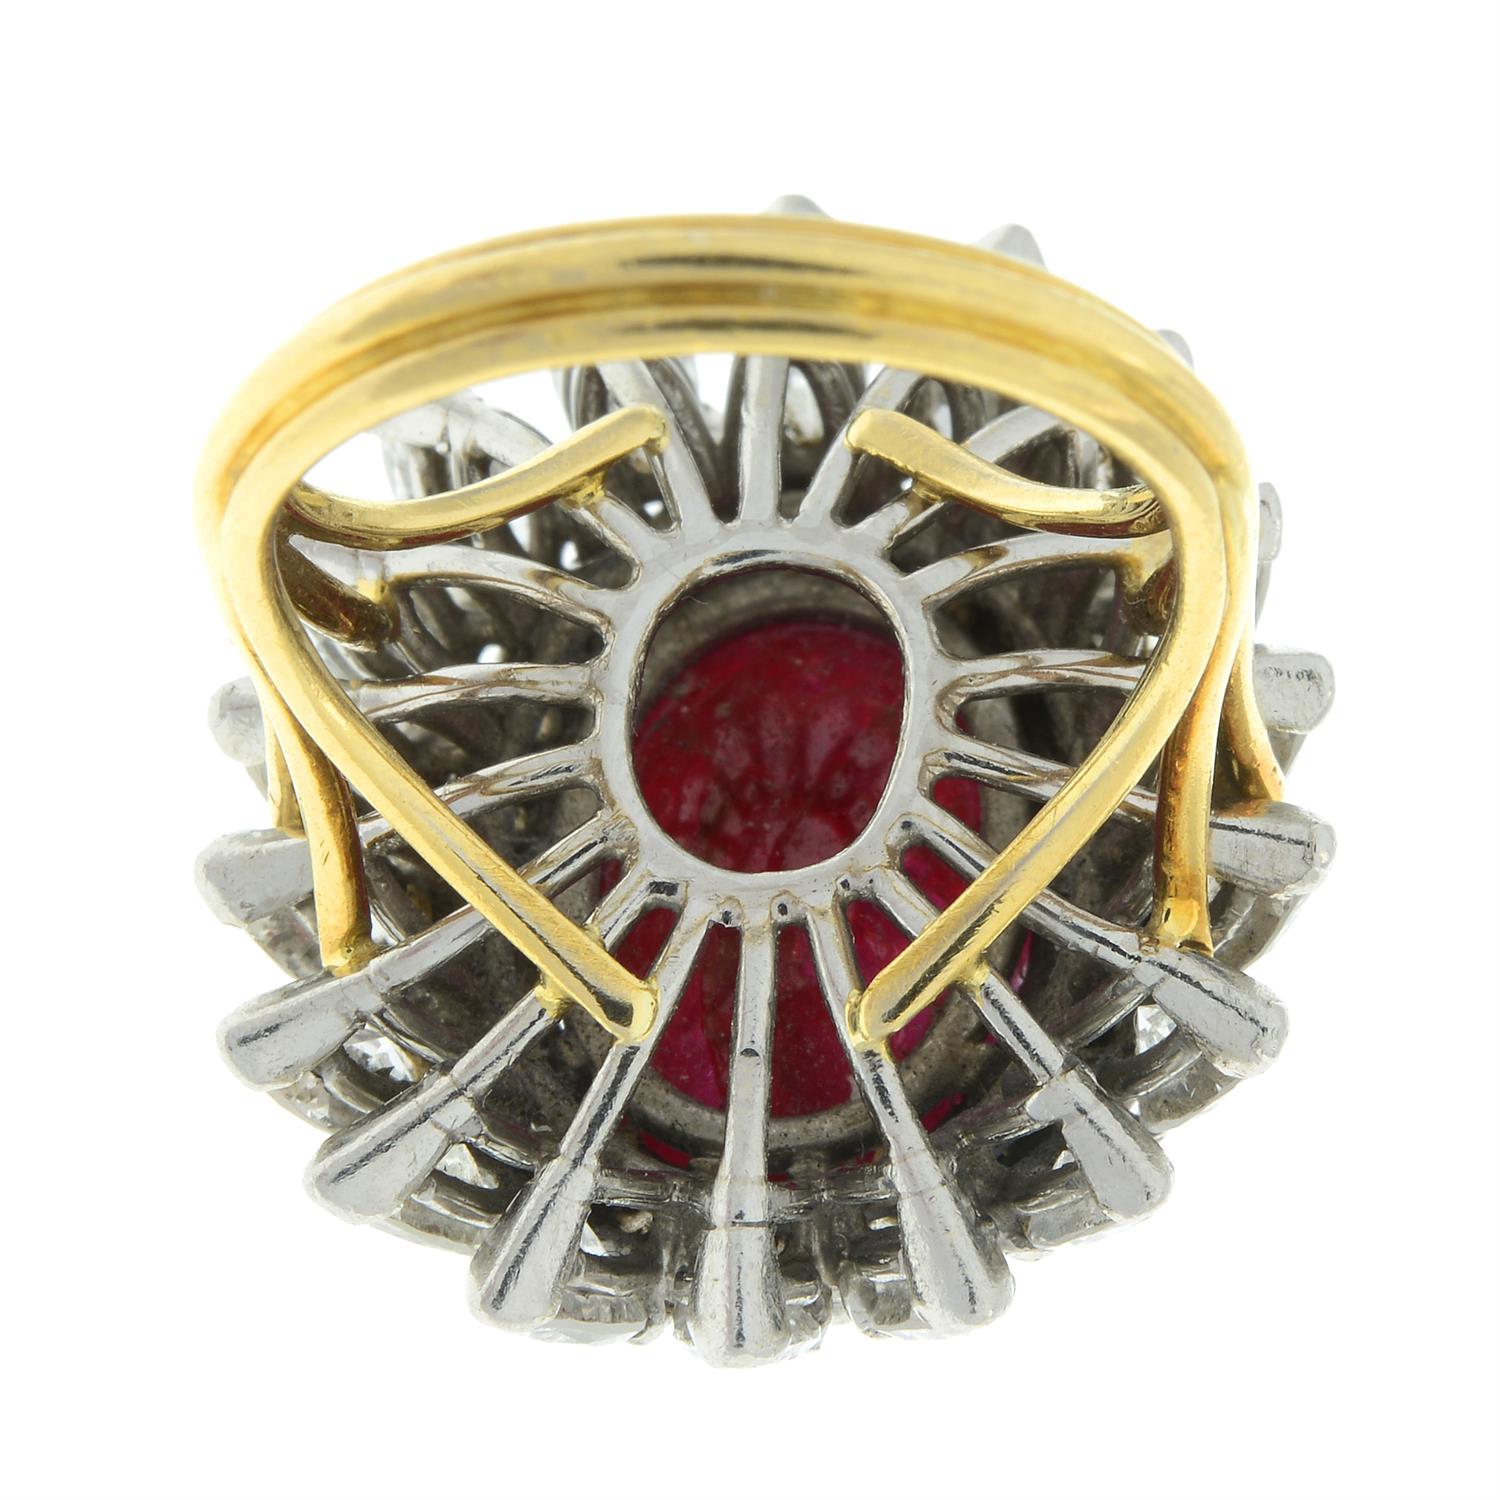 Ruby cabochon and diamond ring - Image 3 of 5